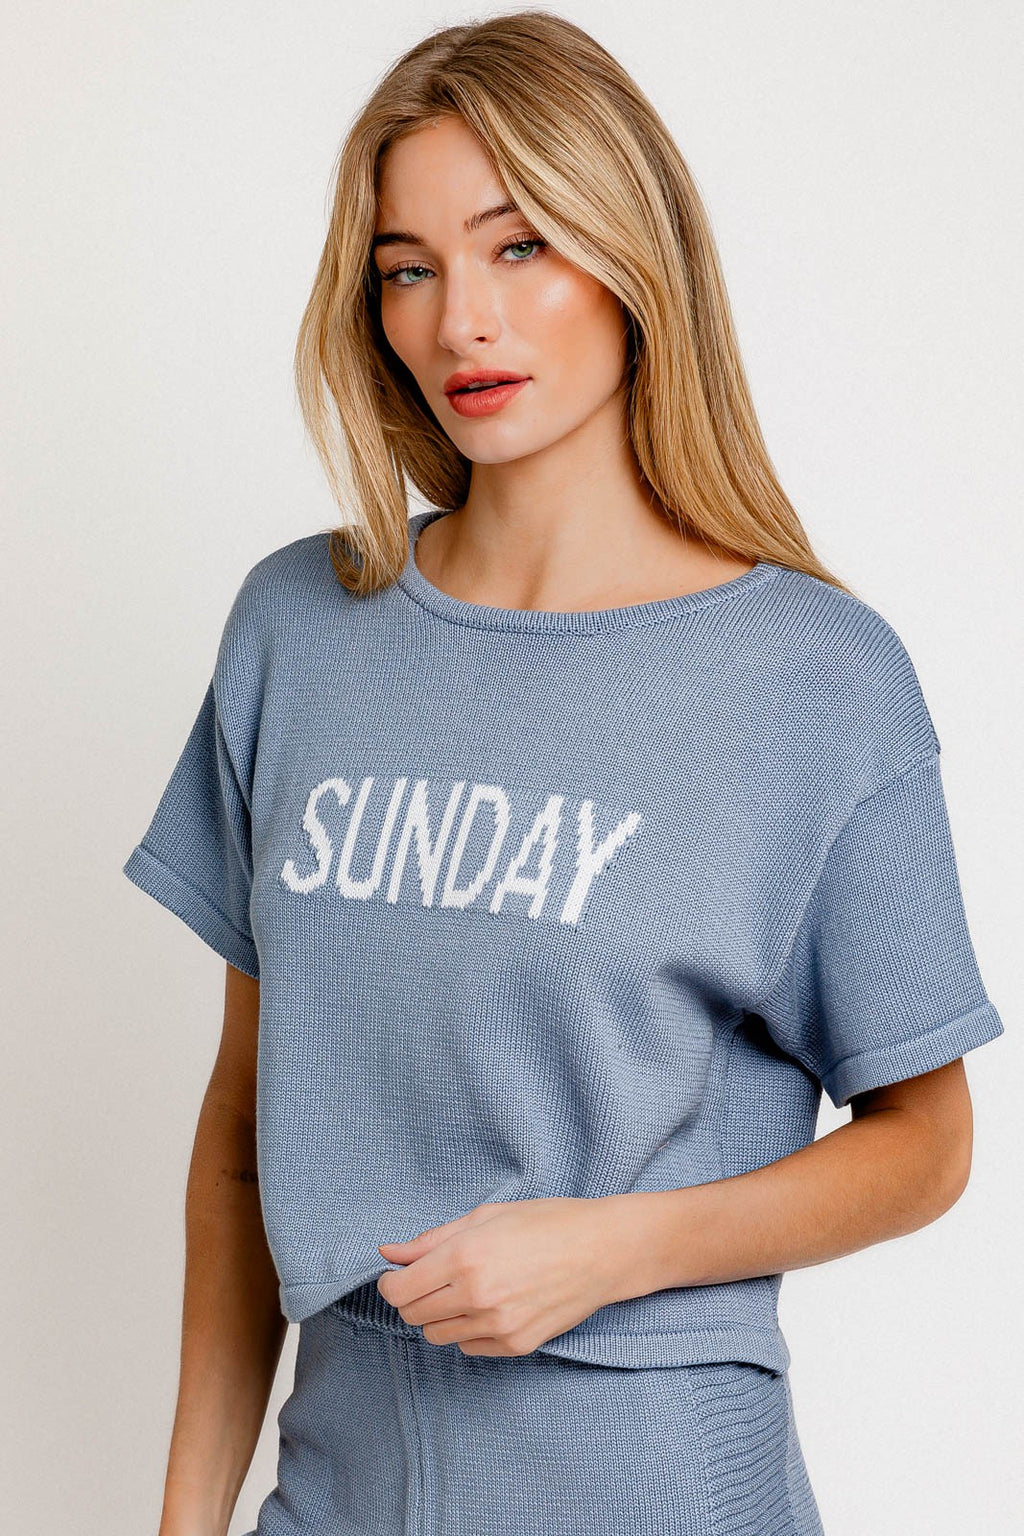 SUNDAY TOP (set sold separately)